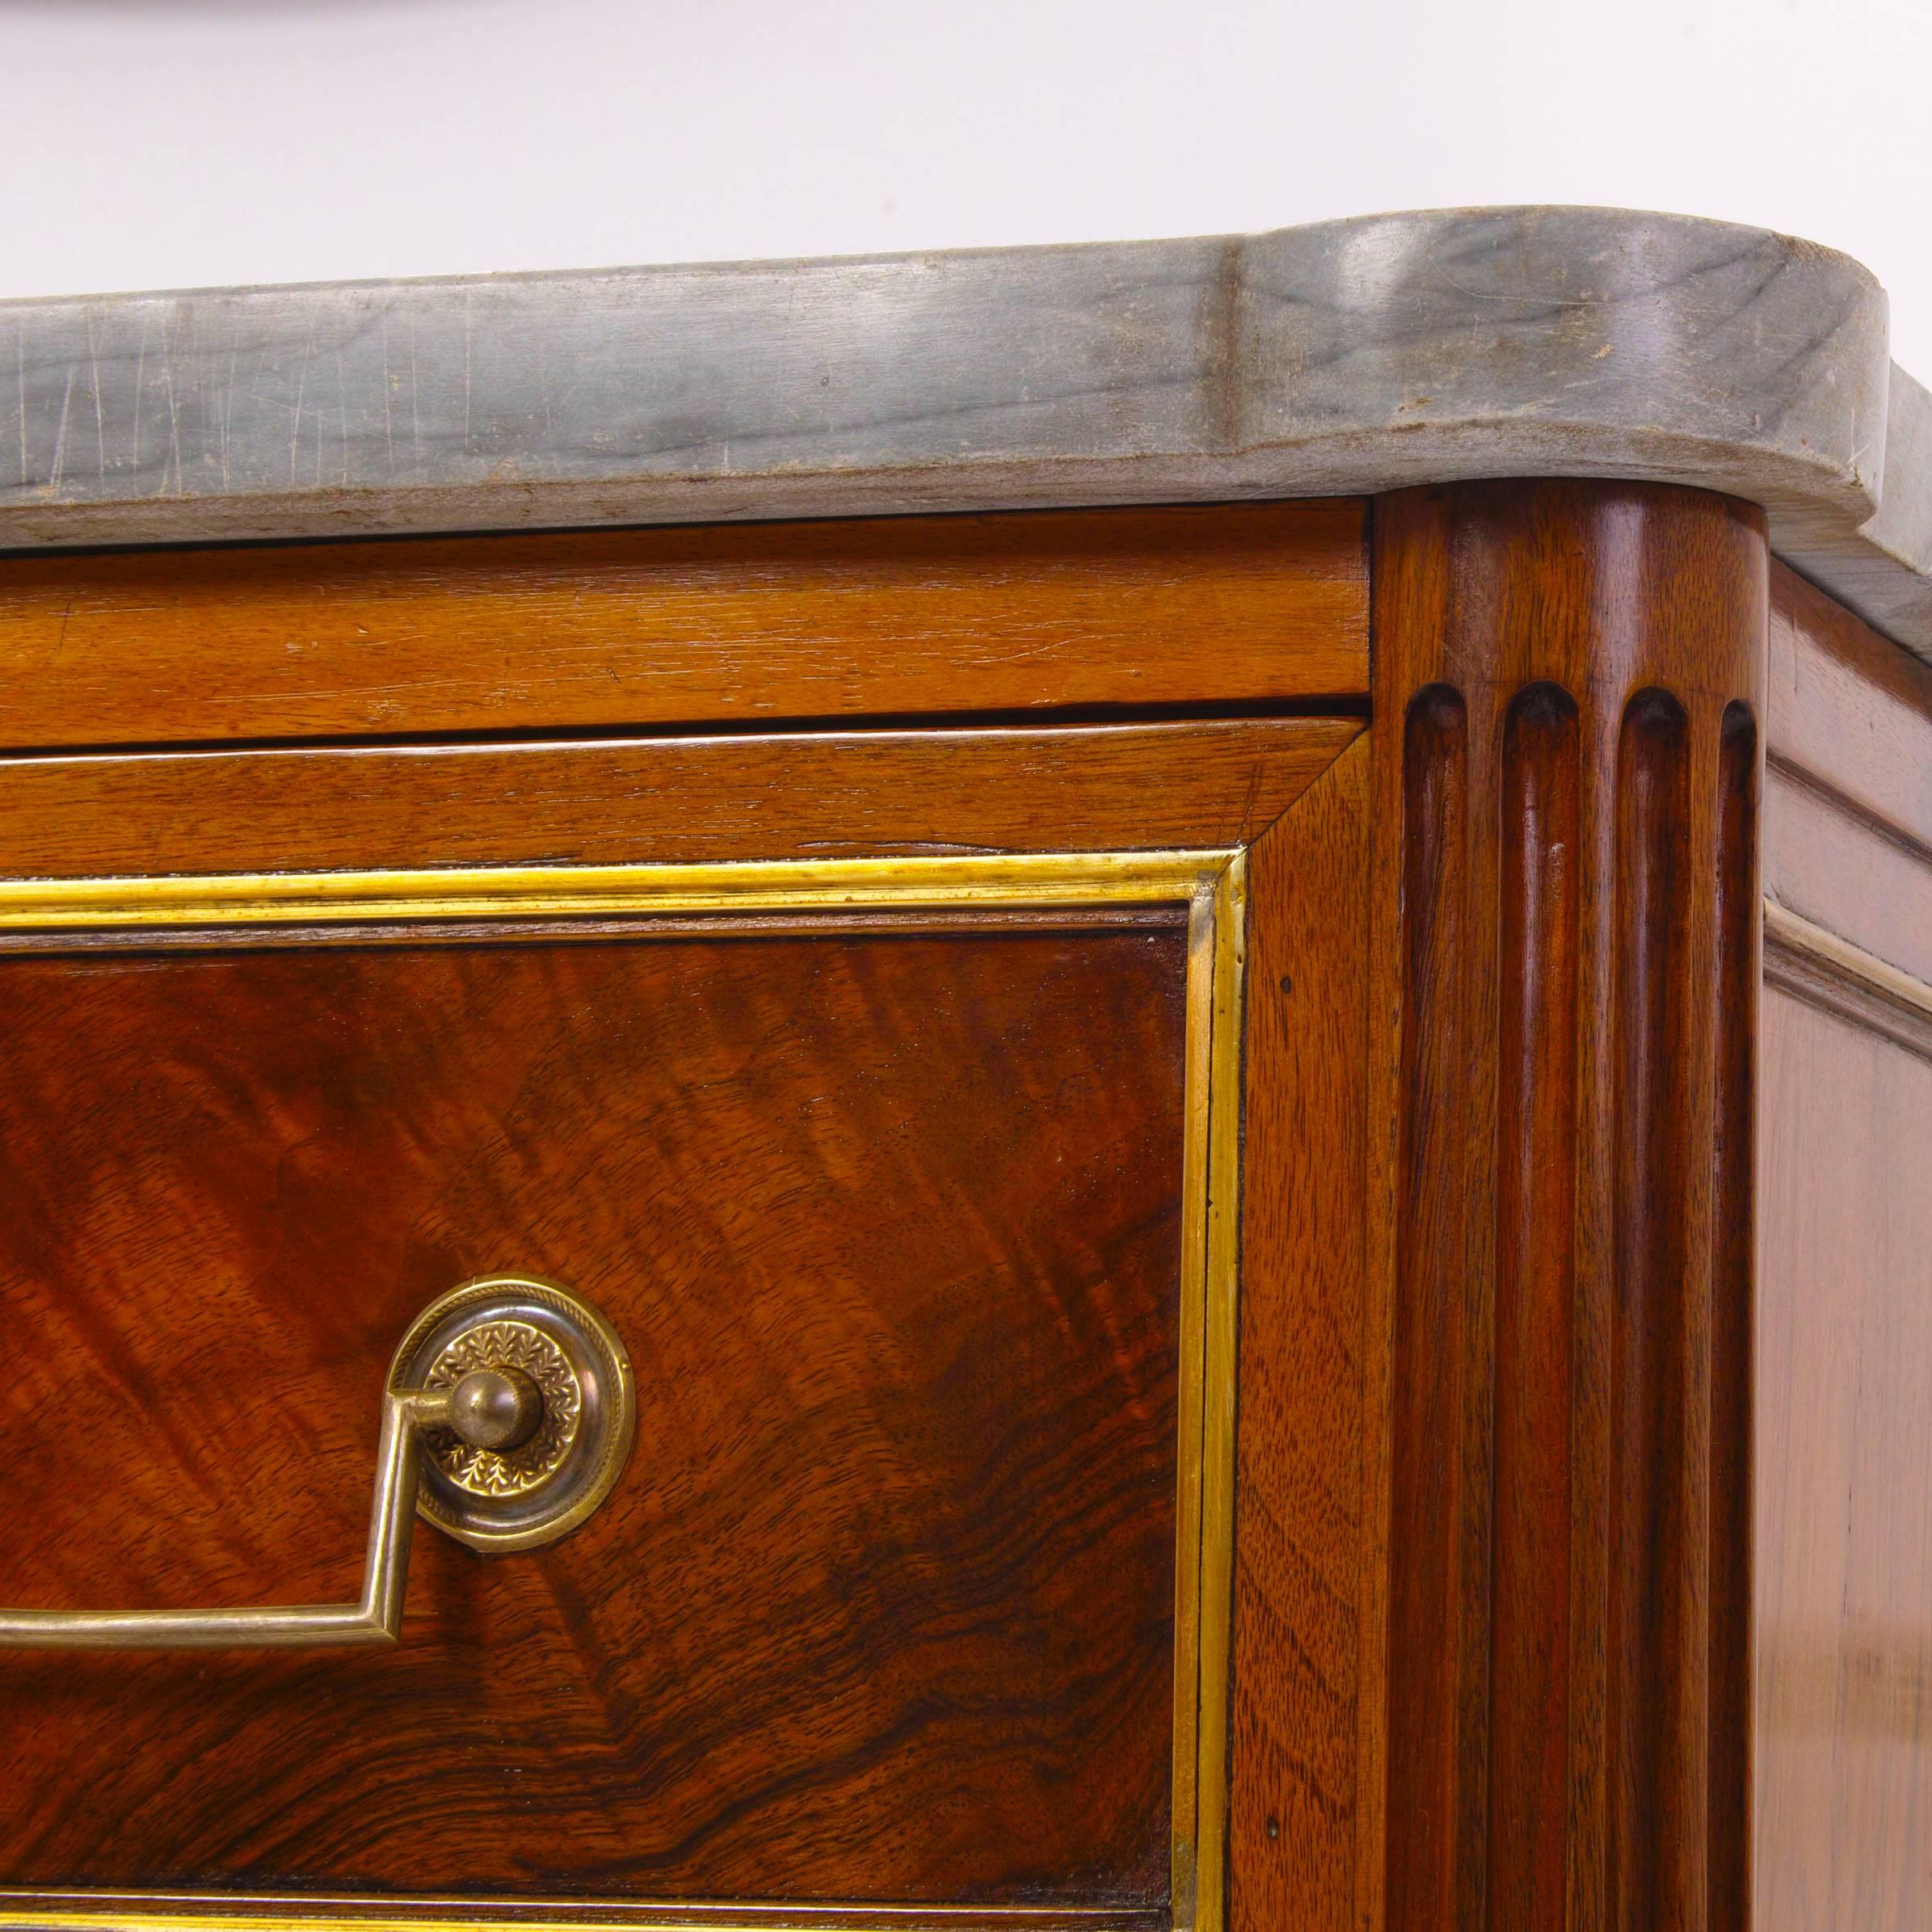 Three-drawered chest on cone legs with fluted column-shaped corners and bronze handles and escutcheons. The tabletop is grey marble. The chest is in original condition, the French polish is restored.